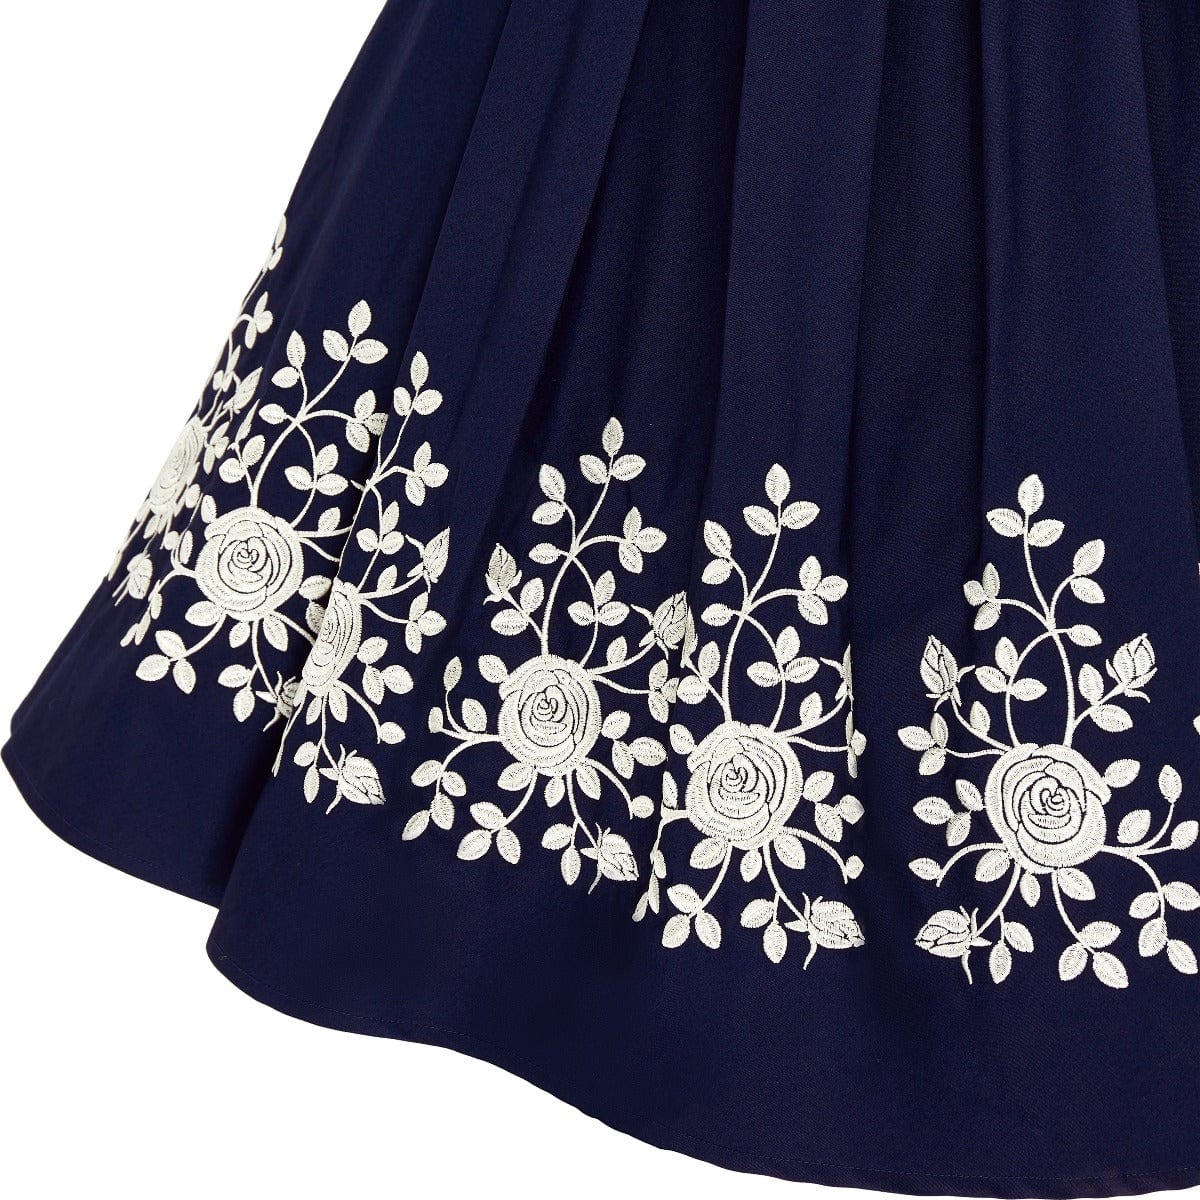 Amanda Embroidered Scoop Neck Swing Dress in Navy Blue-White